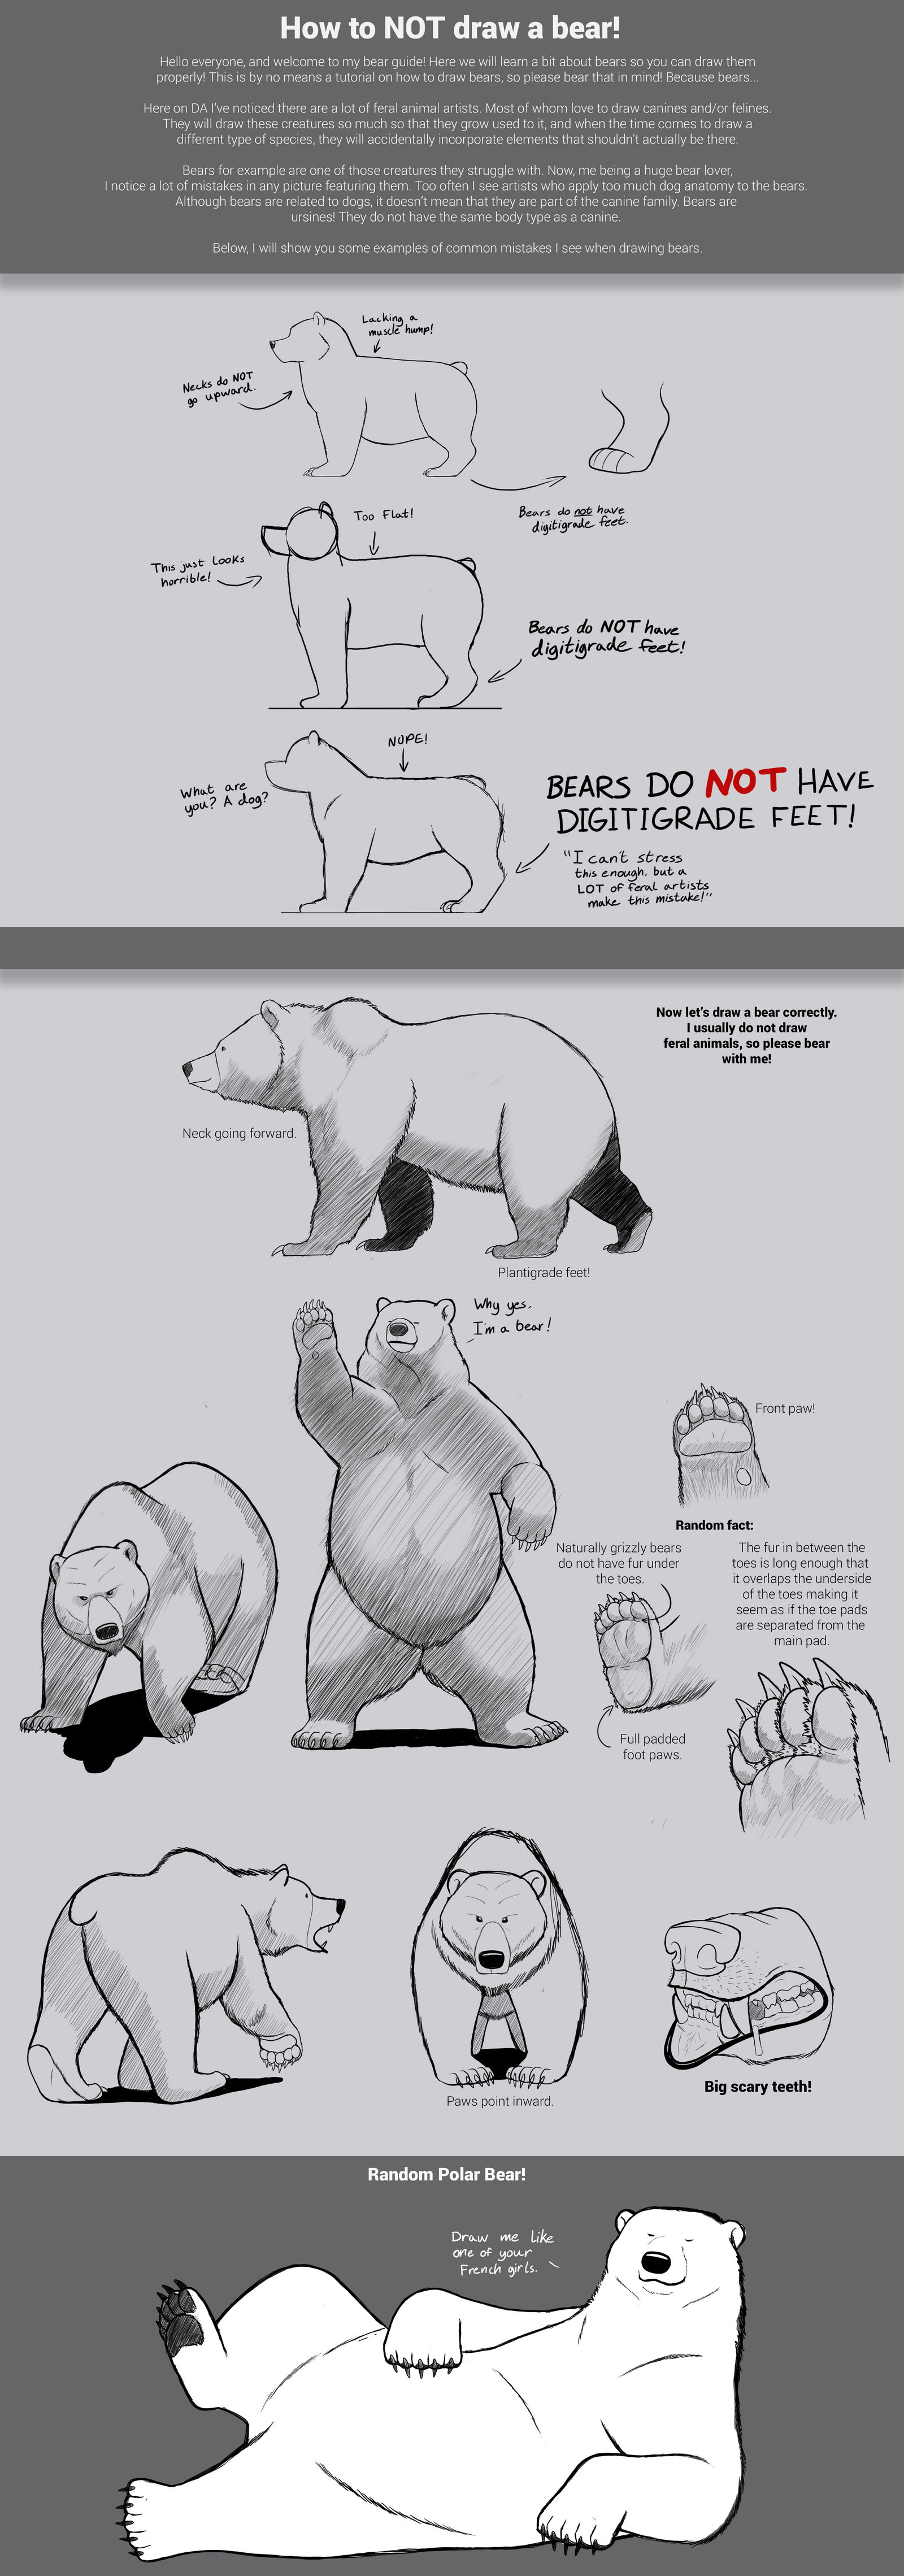 How to not draw a bear.